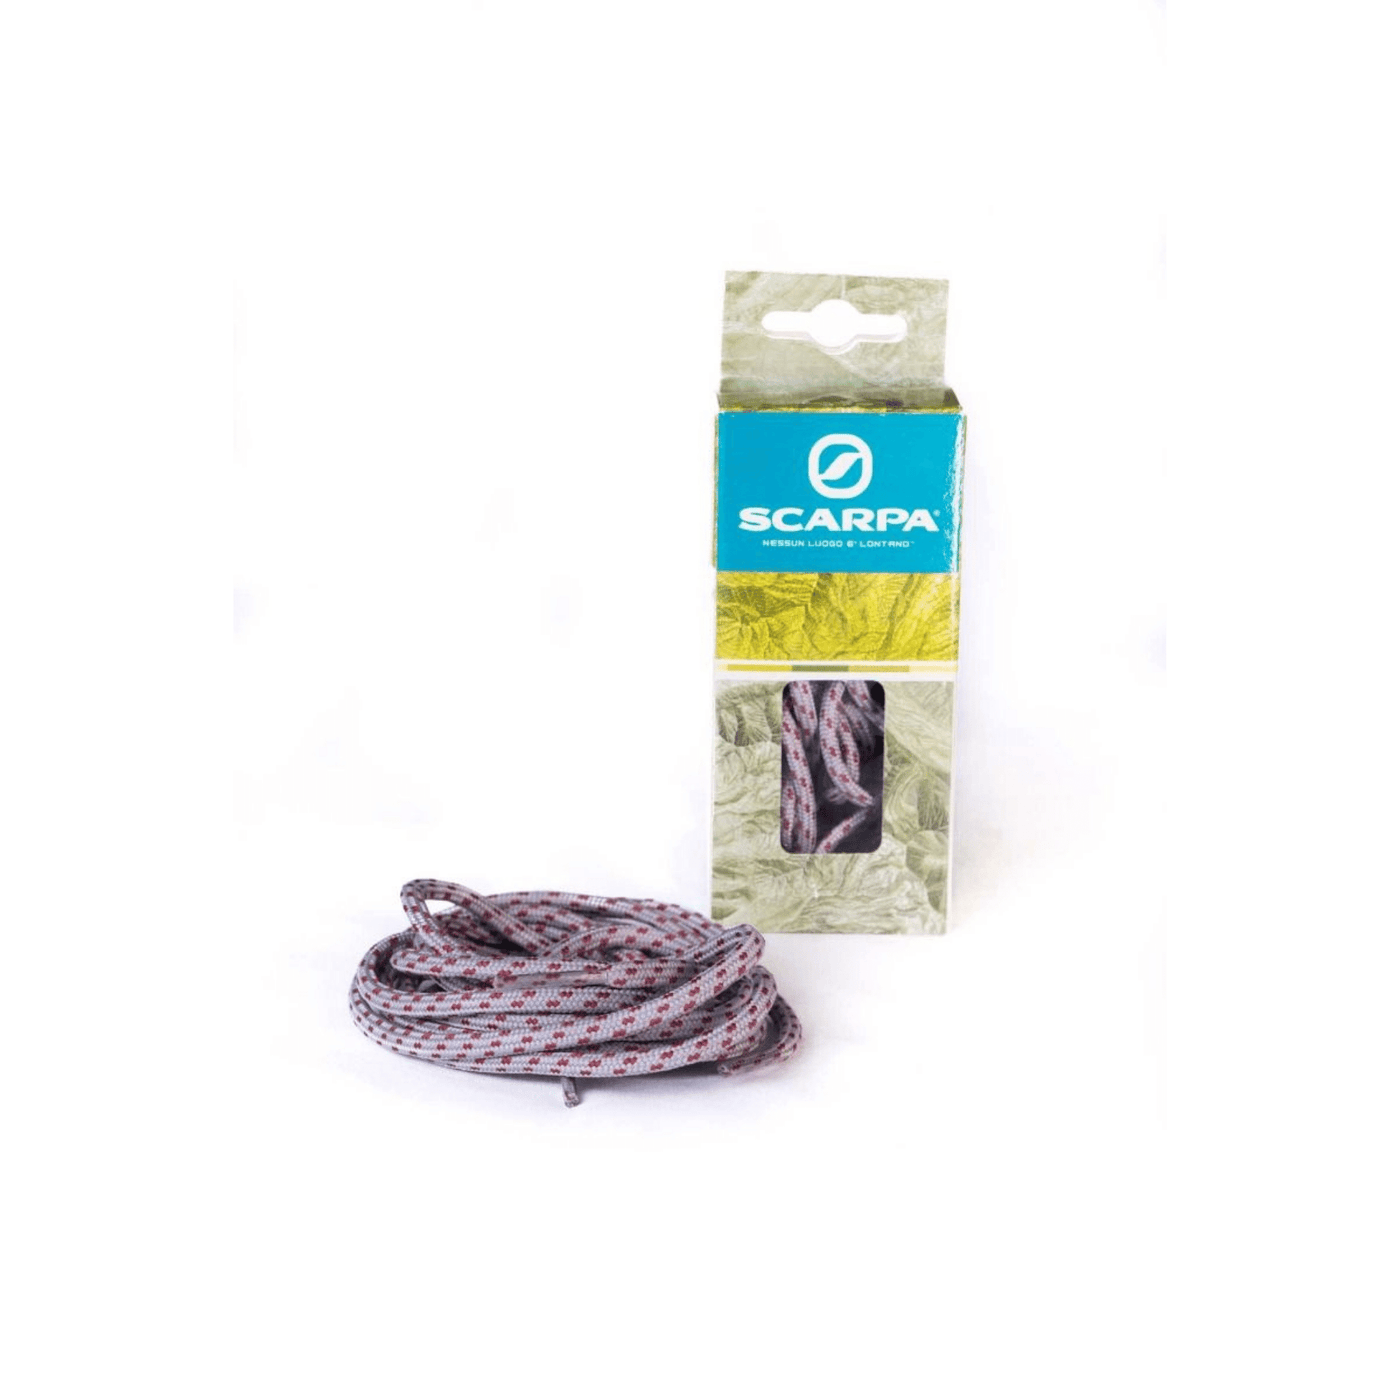 Scarpa Climbing Laces | Rock Climbing Footwear Accessories | Further Faster Christchurch NZ